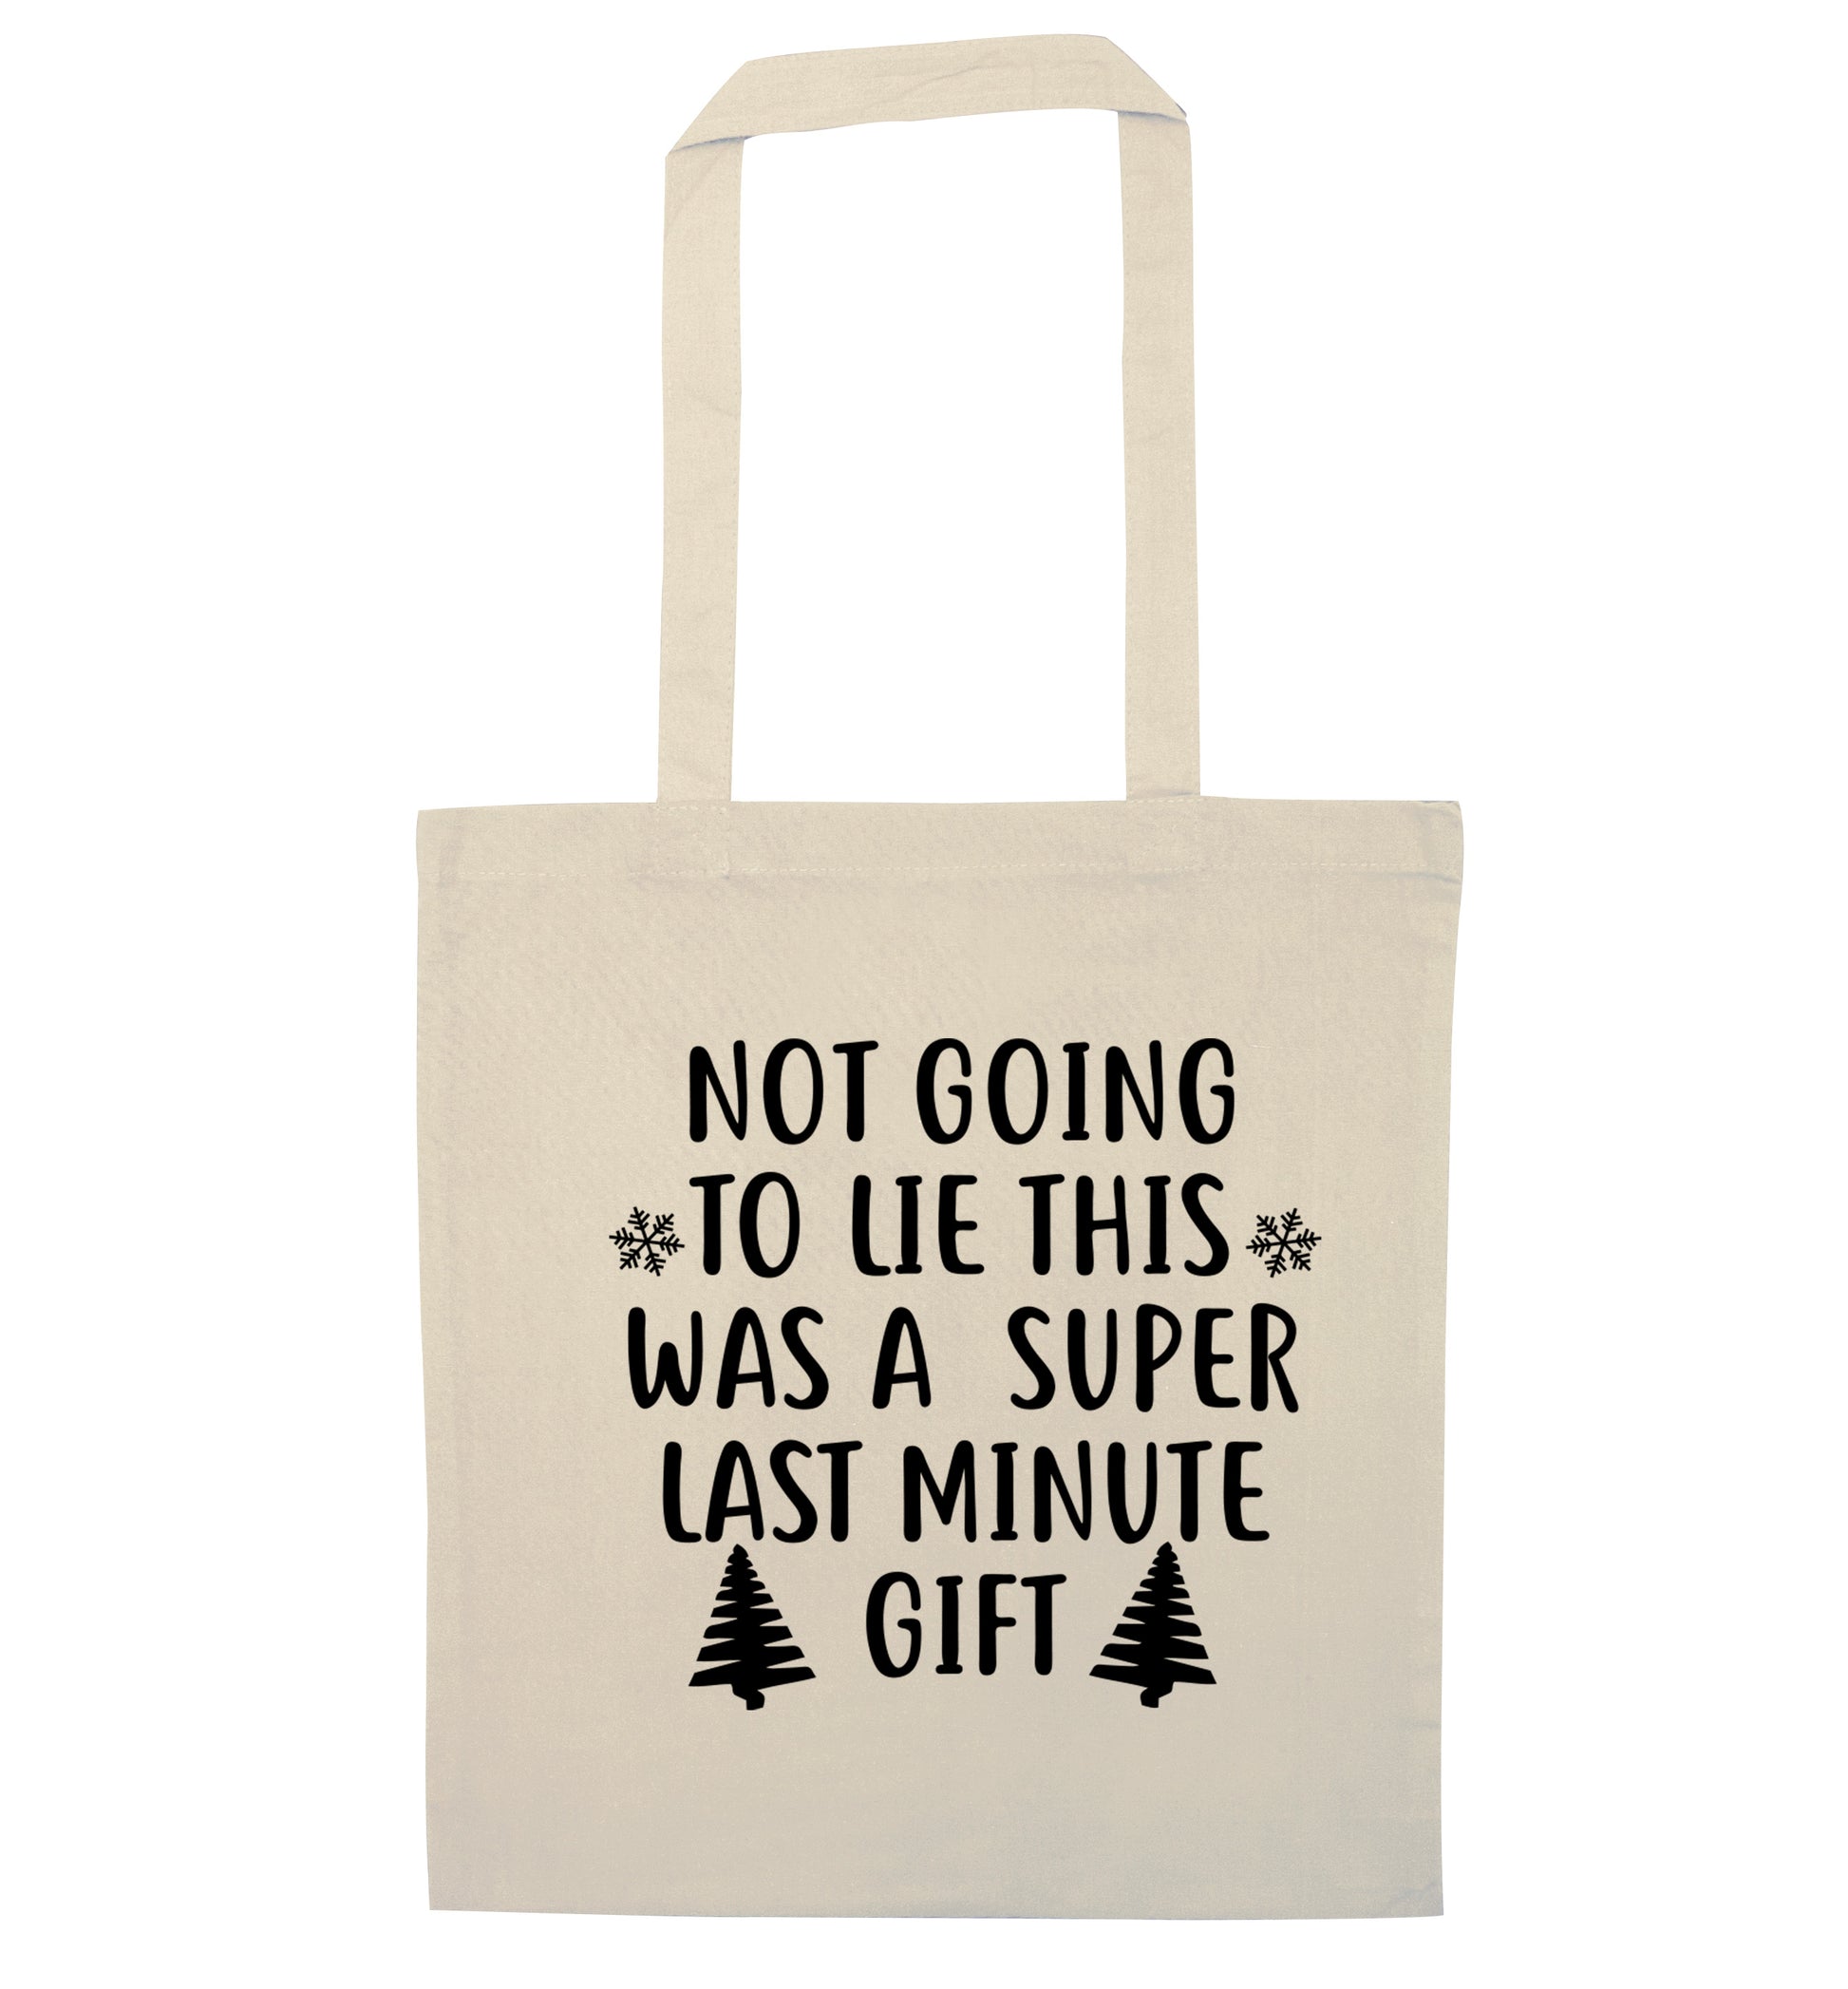 Not going to lie this was a super last minute gift natural tote bag